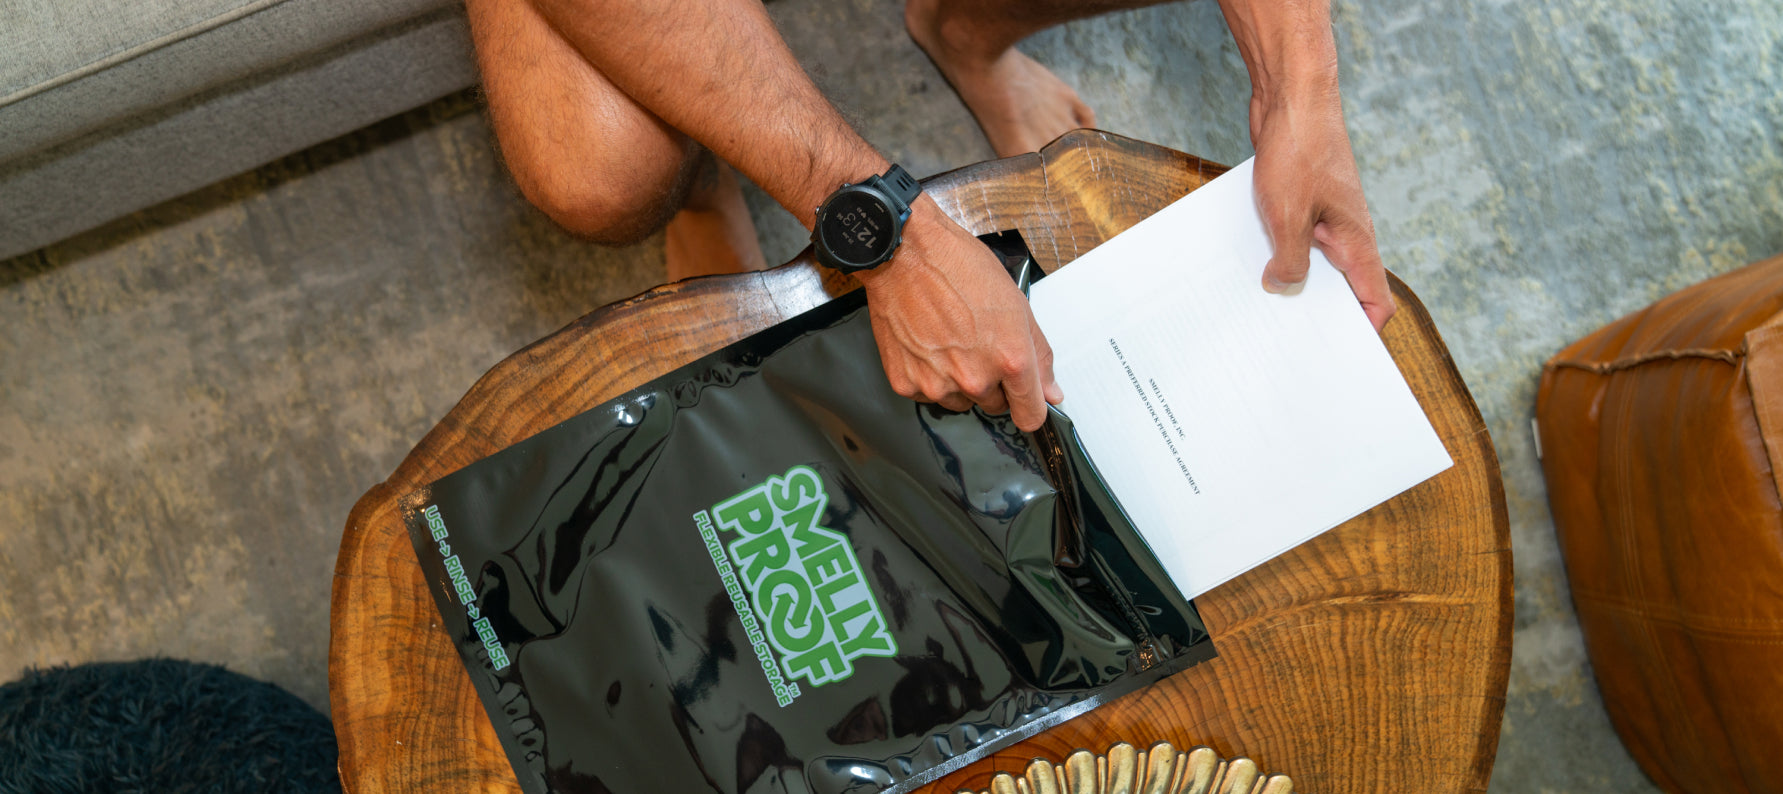 Man Putting Sensitive Documents Into a Black Flat Odor Proof Ziplocking Bag for Protection